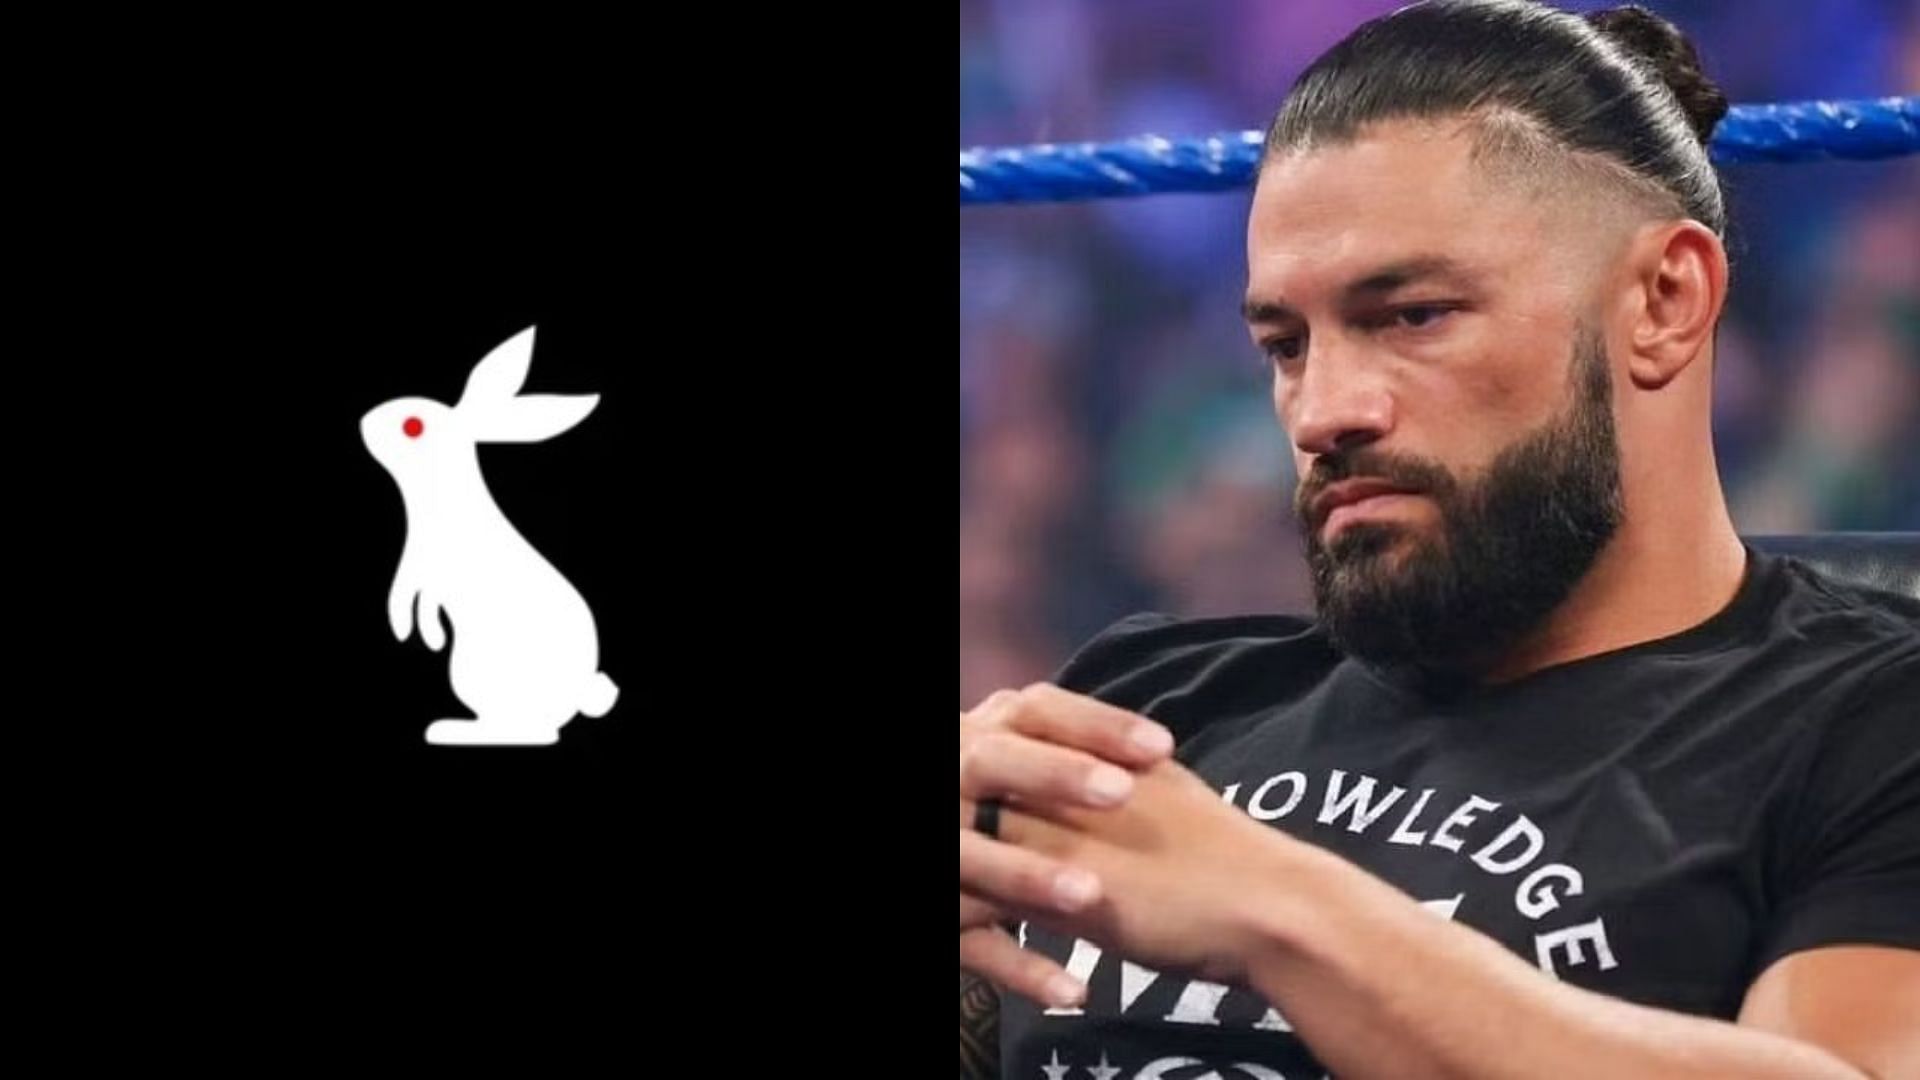 The White Rabbit could be a thorn in Roman Reigns